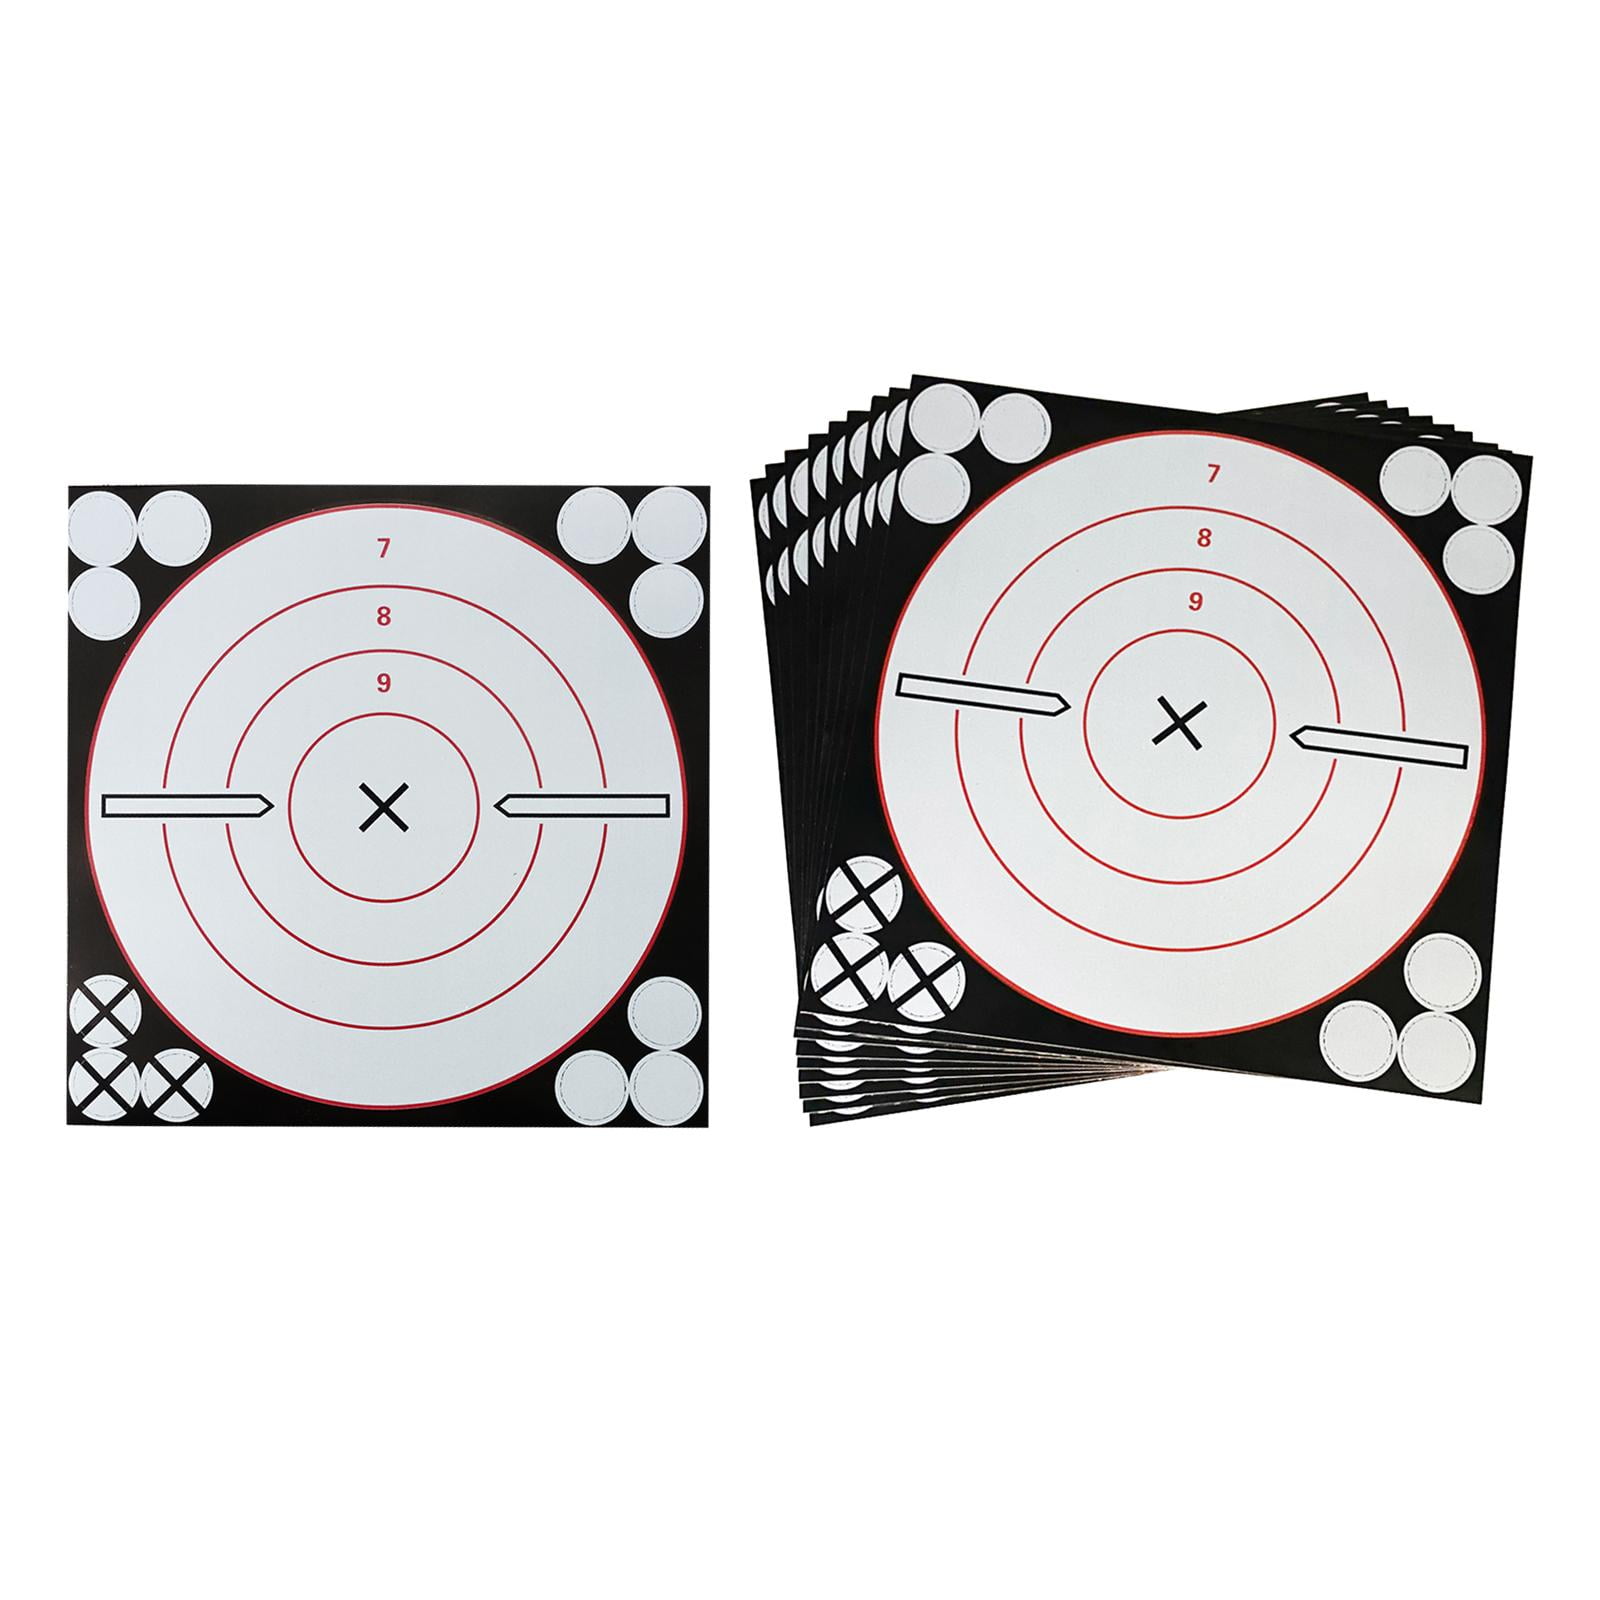 3x   Target Aim Spinning Shooting Targets Practicing Accessories 